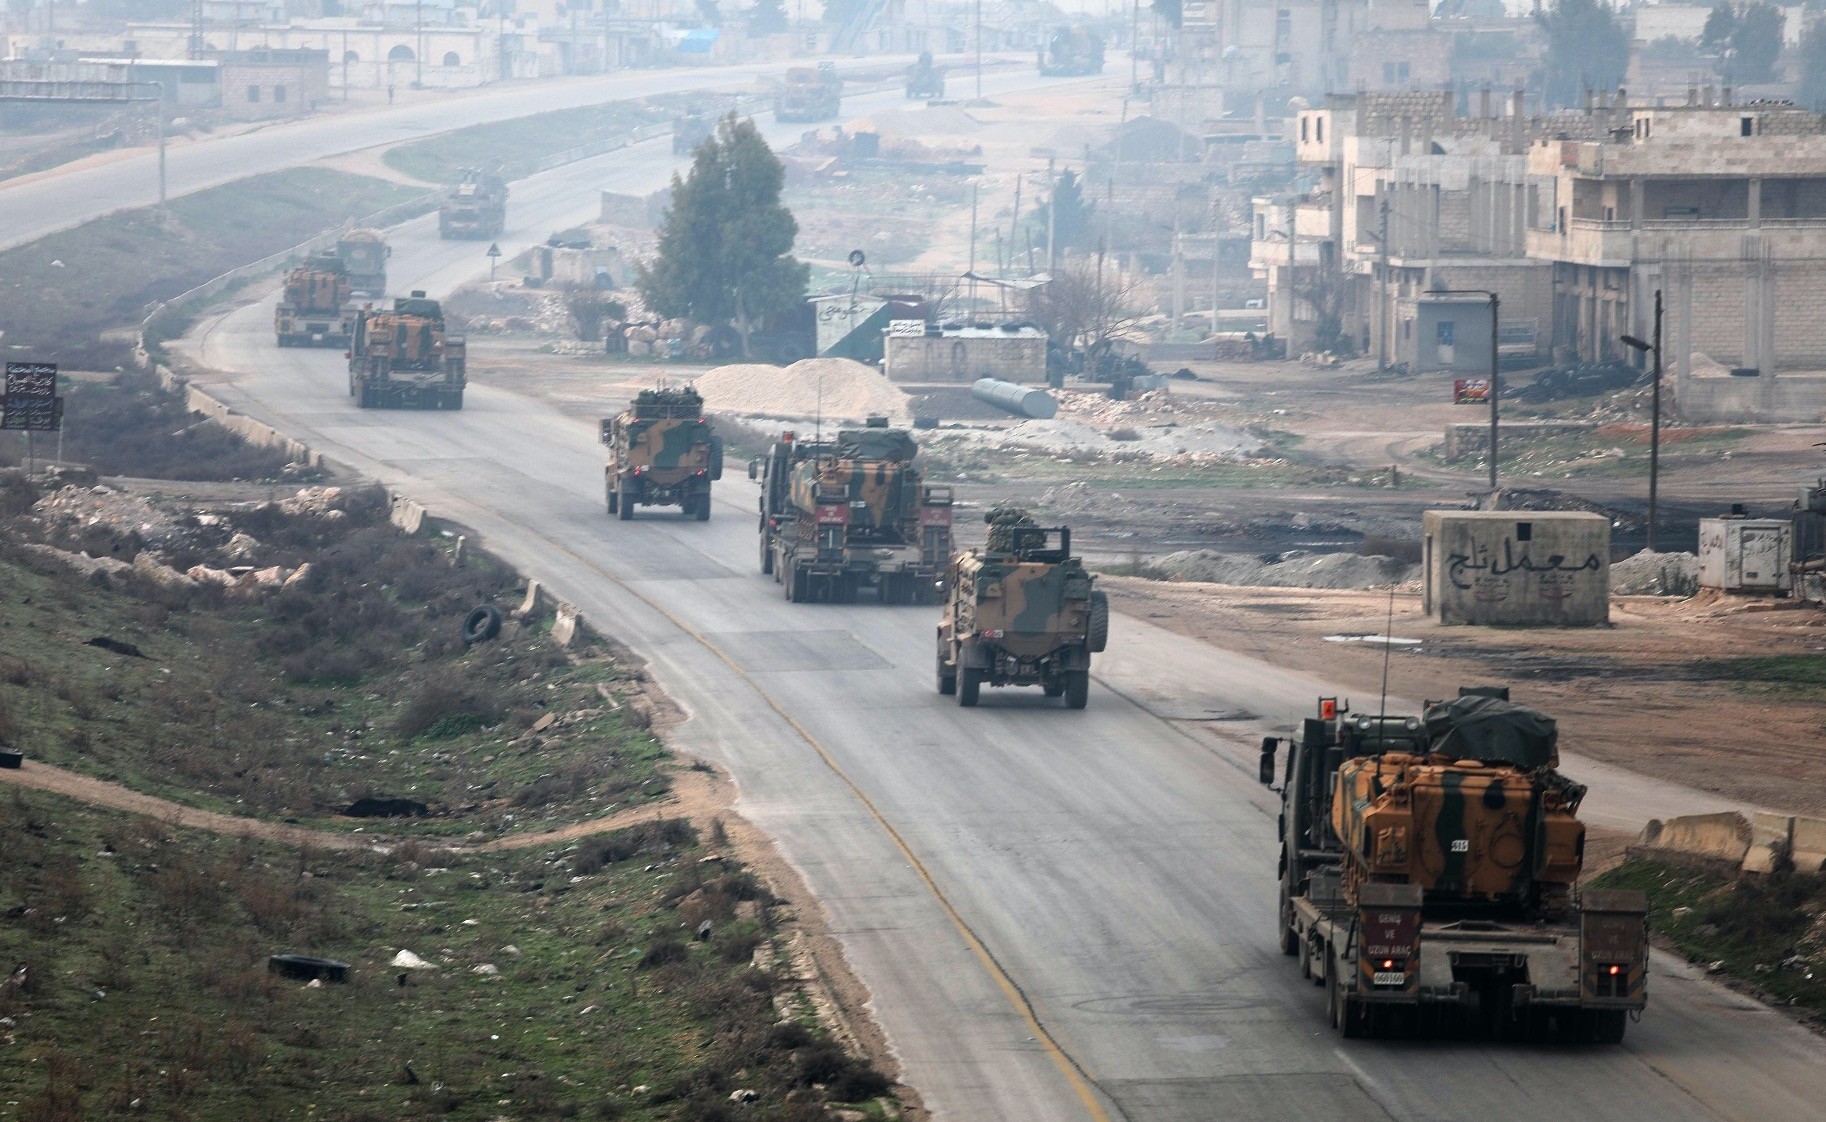 A Turkish military convoy in Idlib on Feb. 15 as part of Turkeyu2019s role in the de-escalation zones established during the Astana talks.